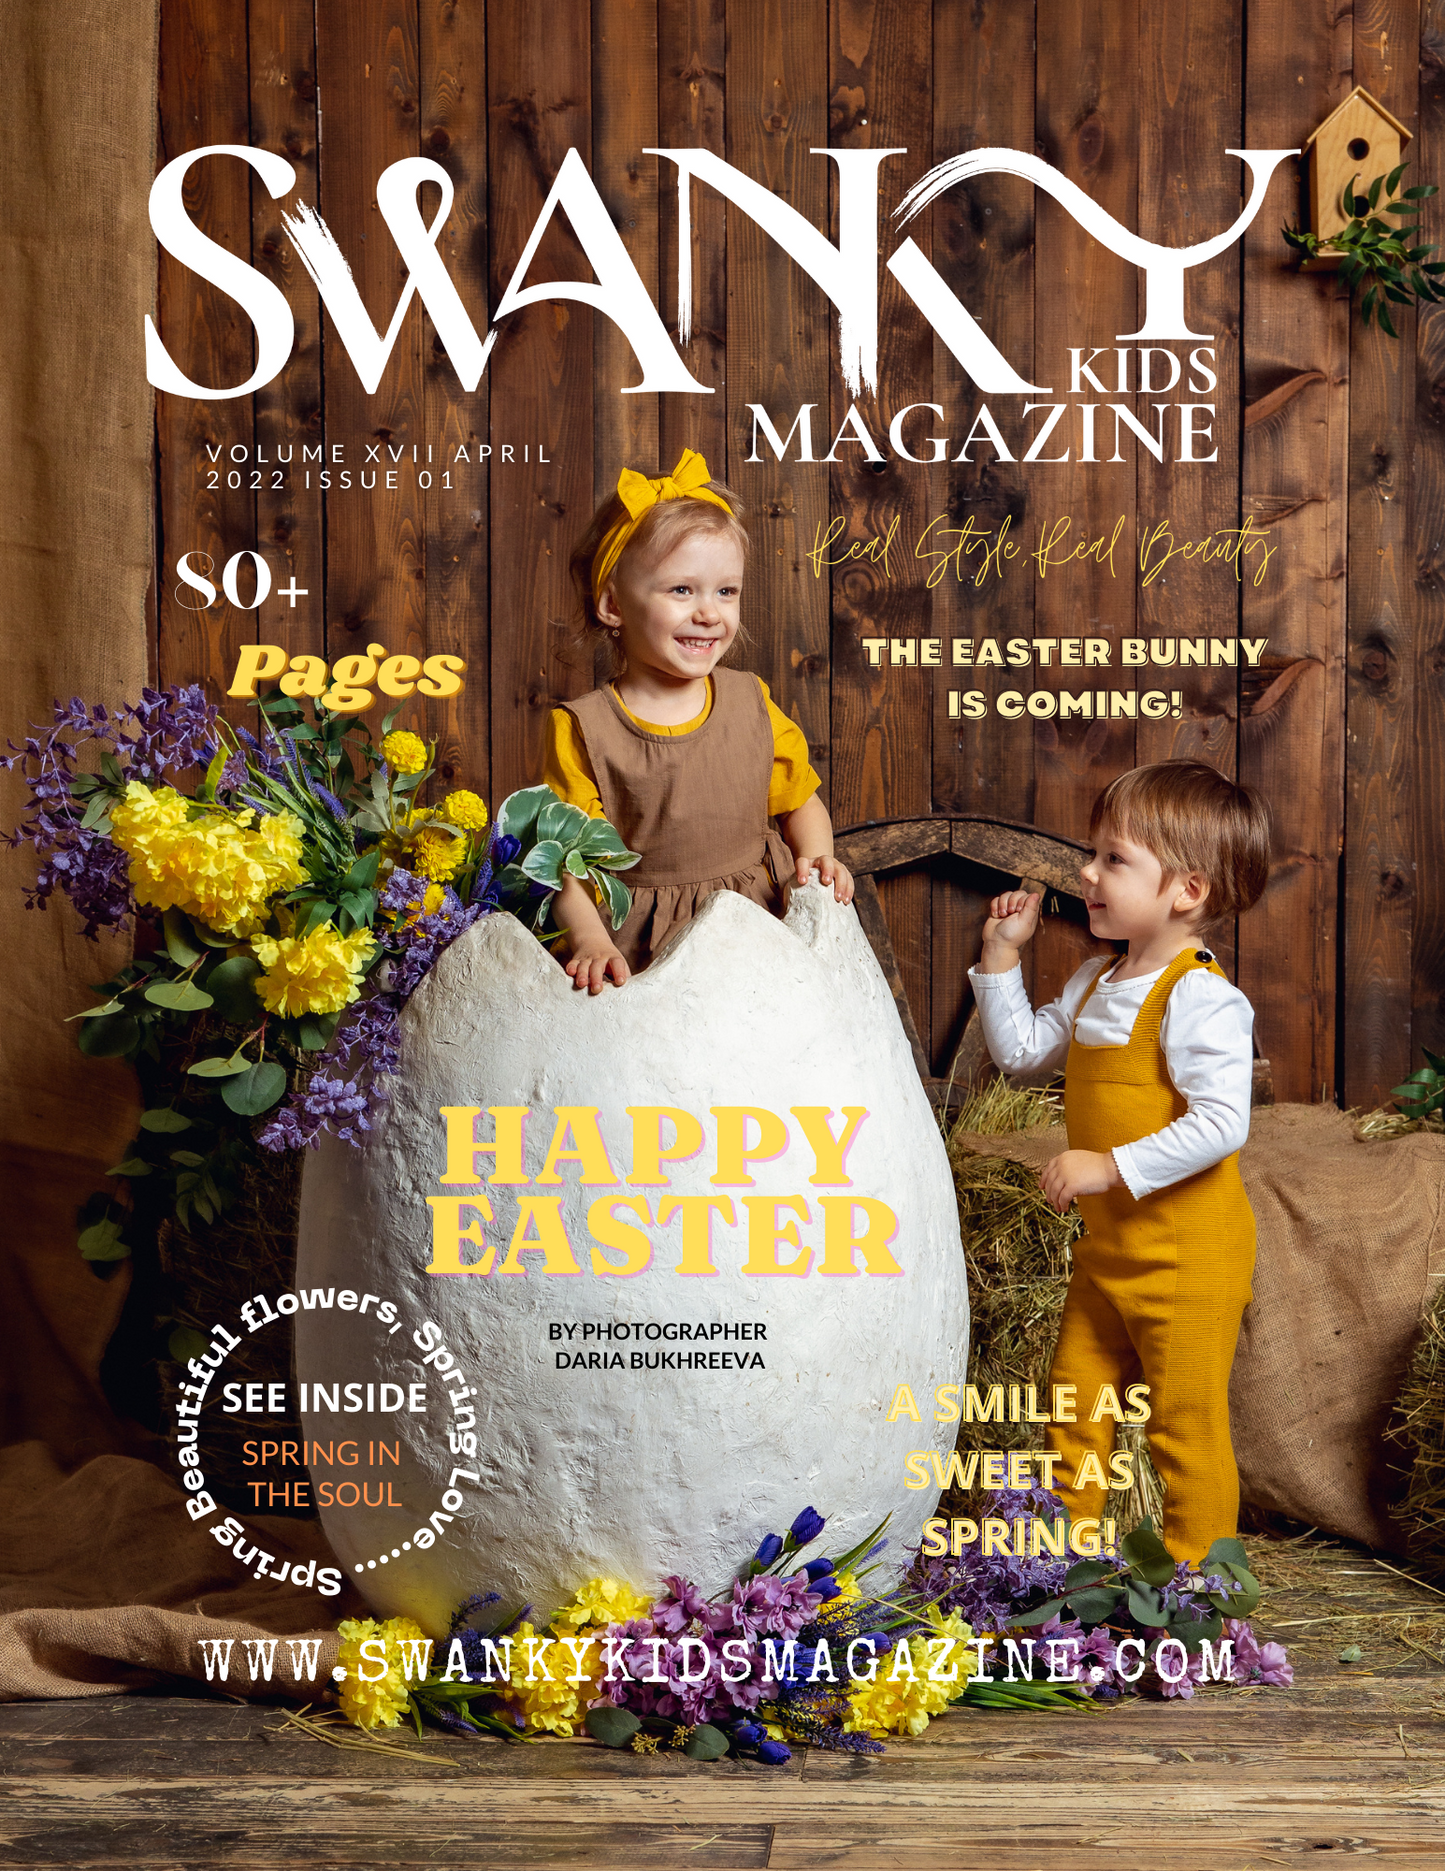 Swanky Kids Magazine Easter Special 2022 VOL XVII Issue 1